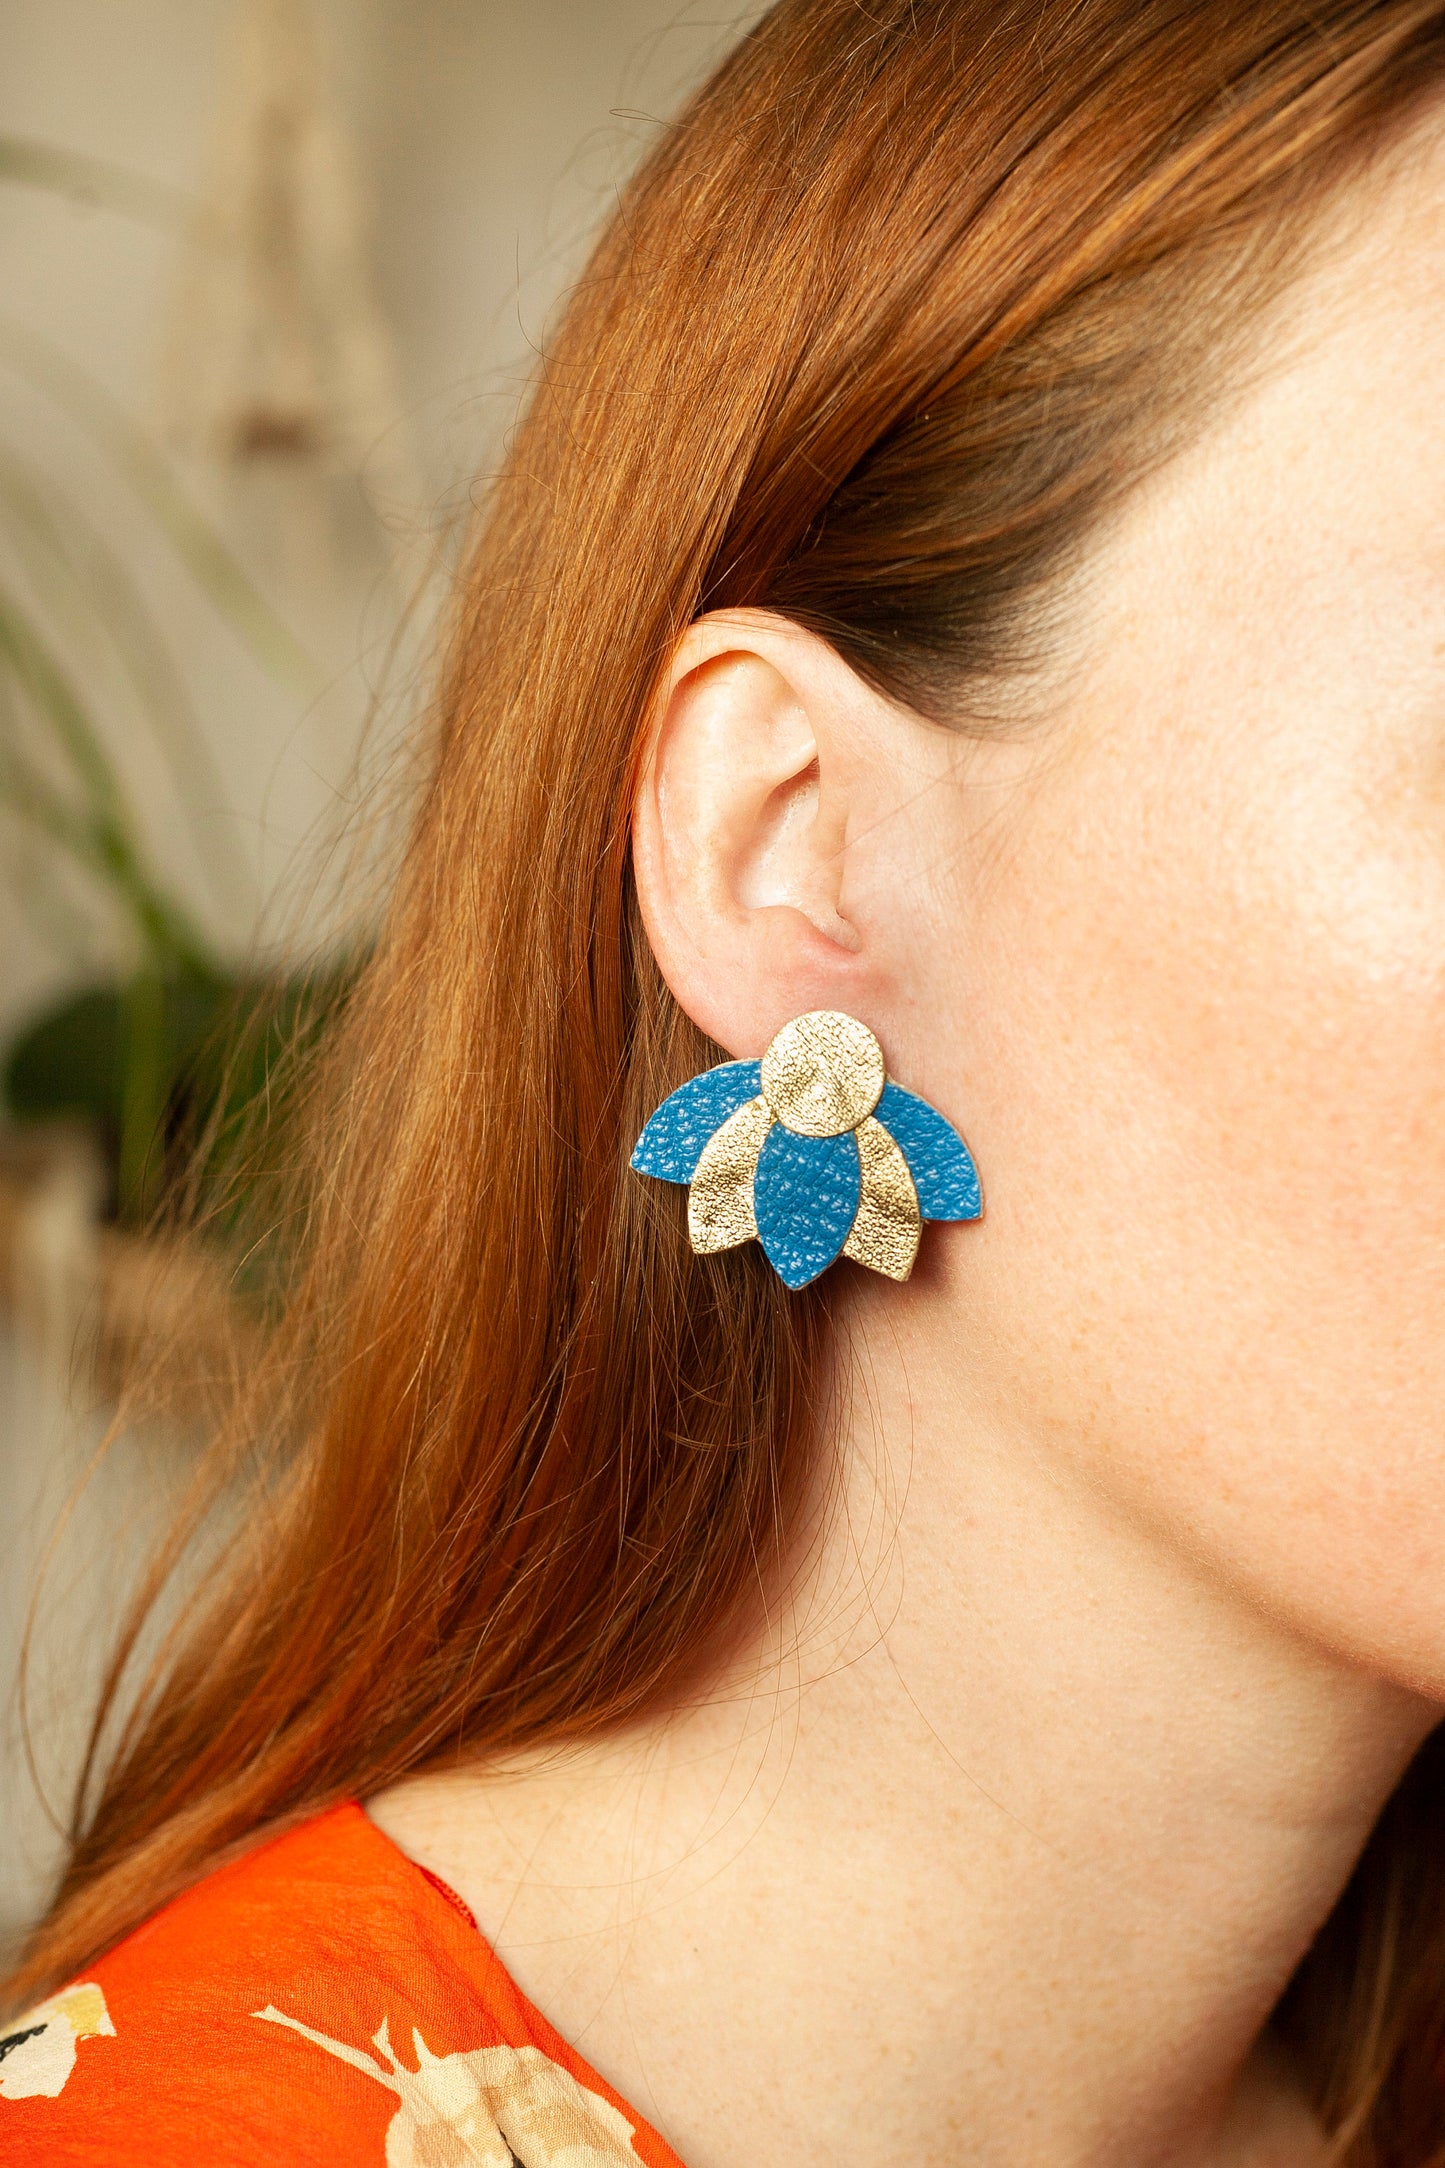 Water lily earrings in blue and gold leather